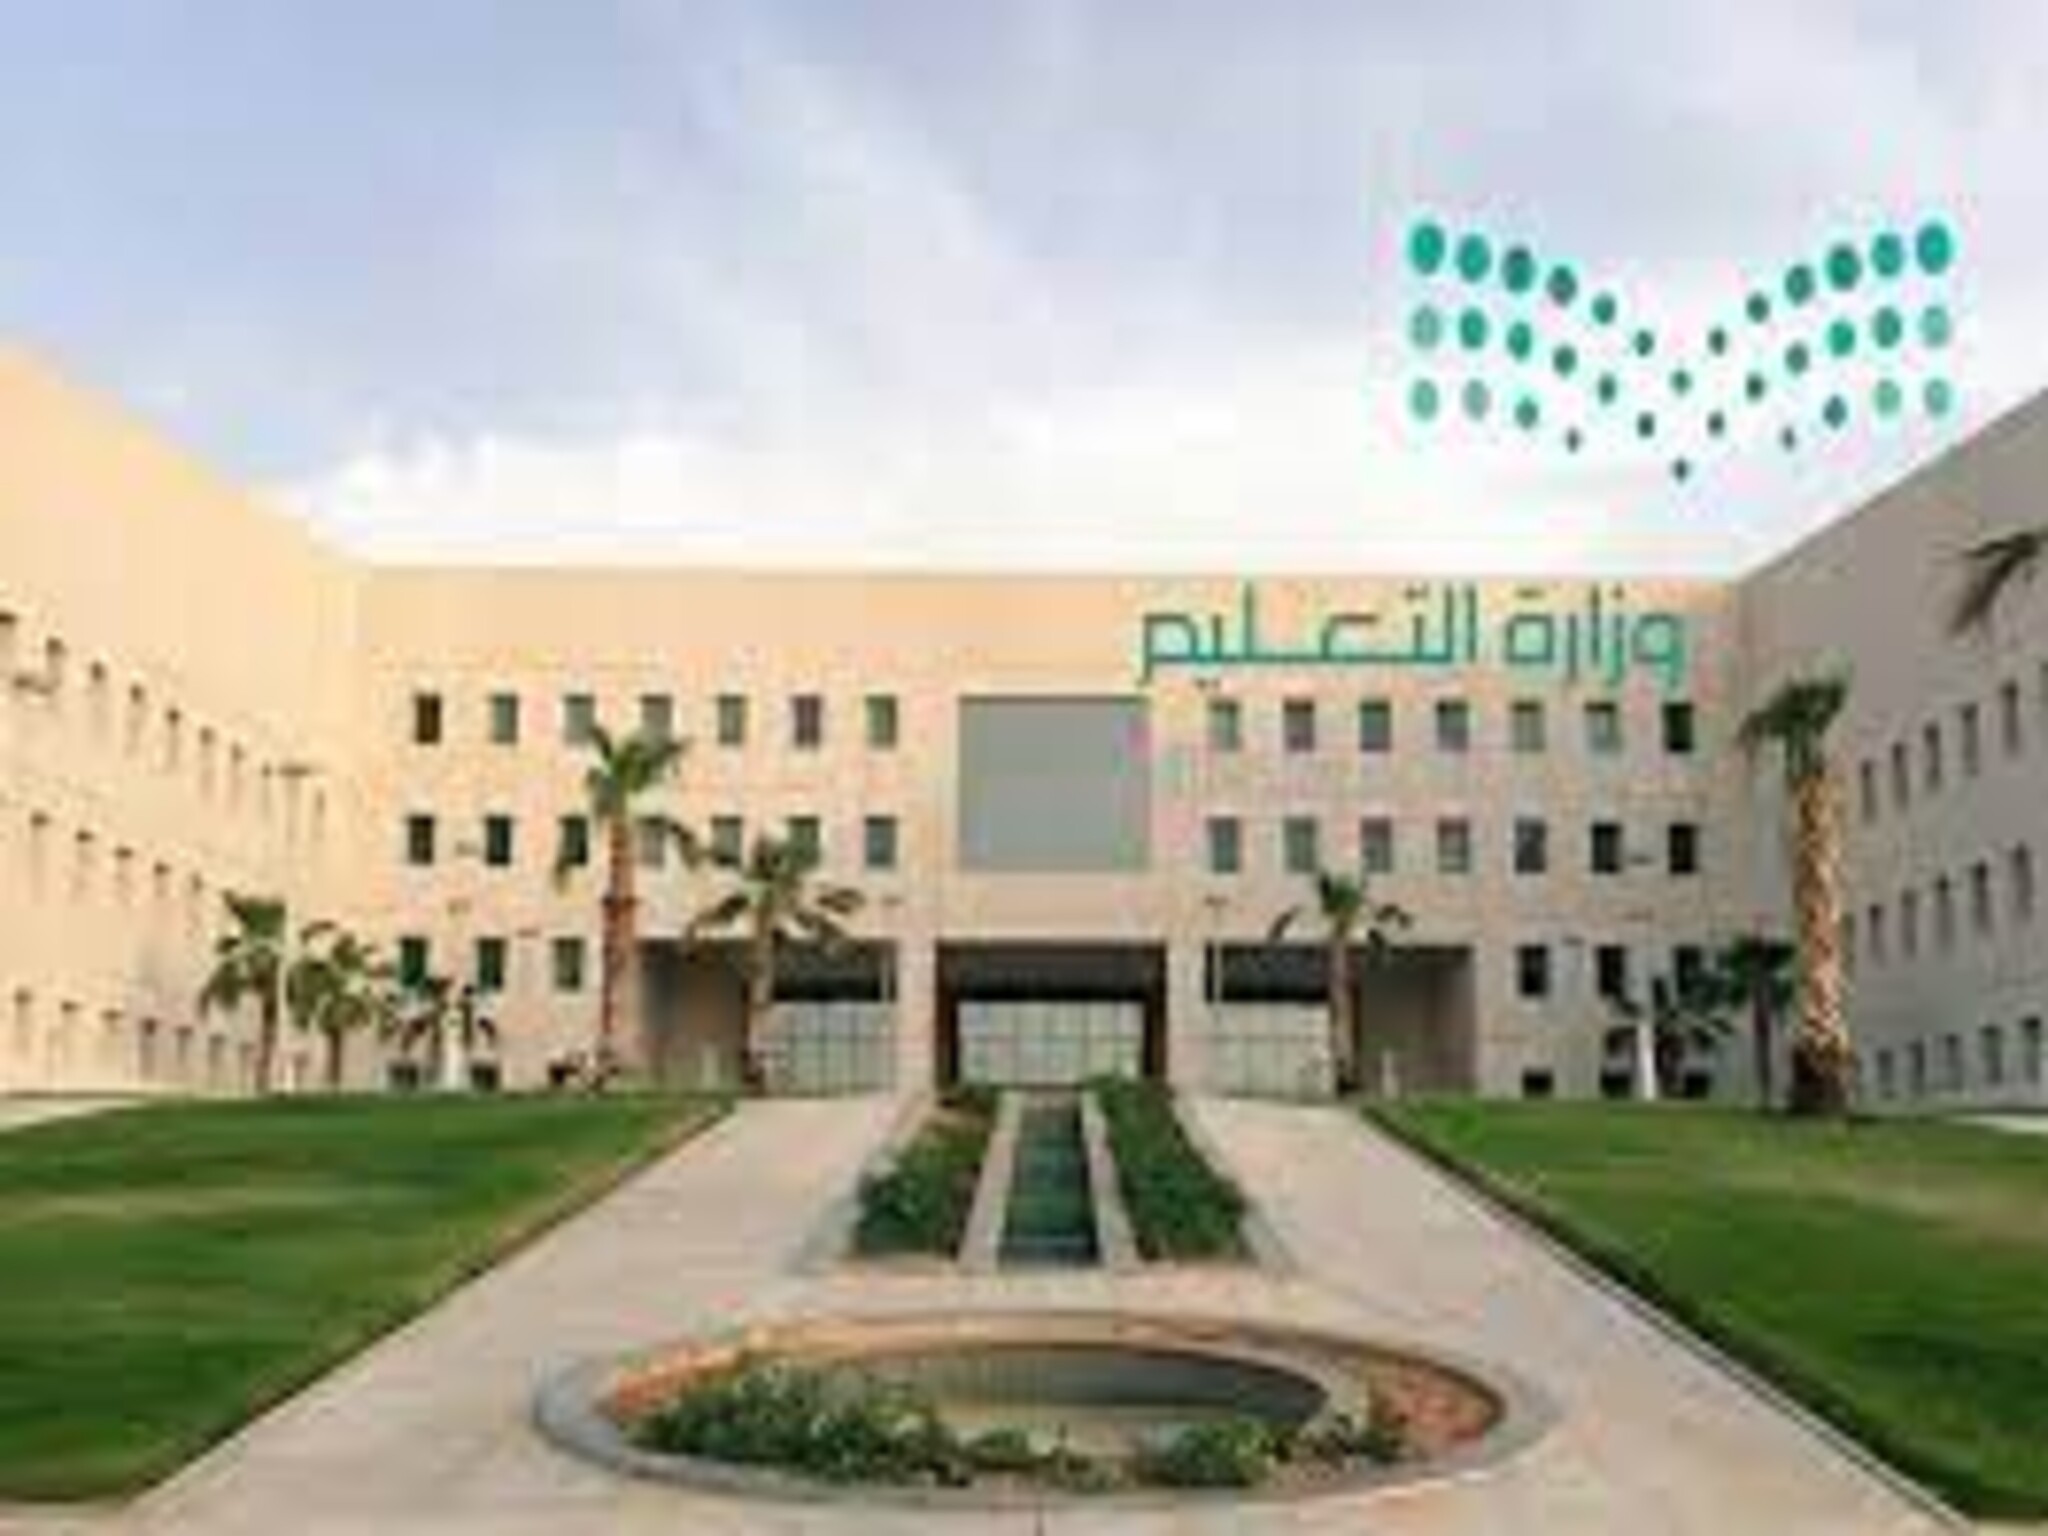 The opening of 95 new schools in "Riyadh Education" will serve more than 40,000 male and female students.